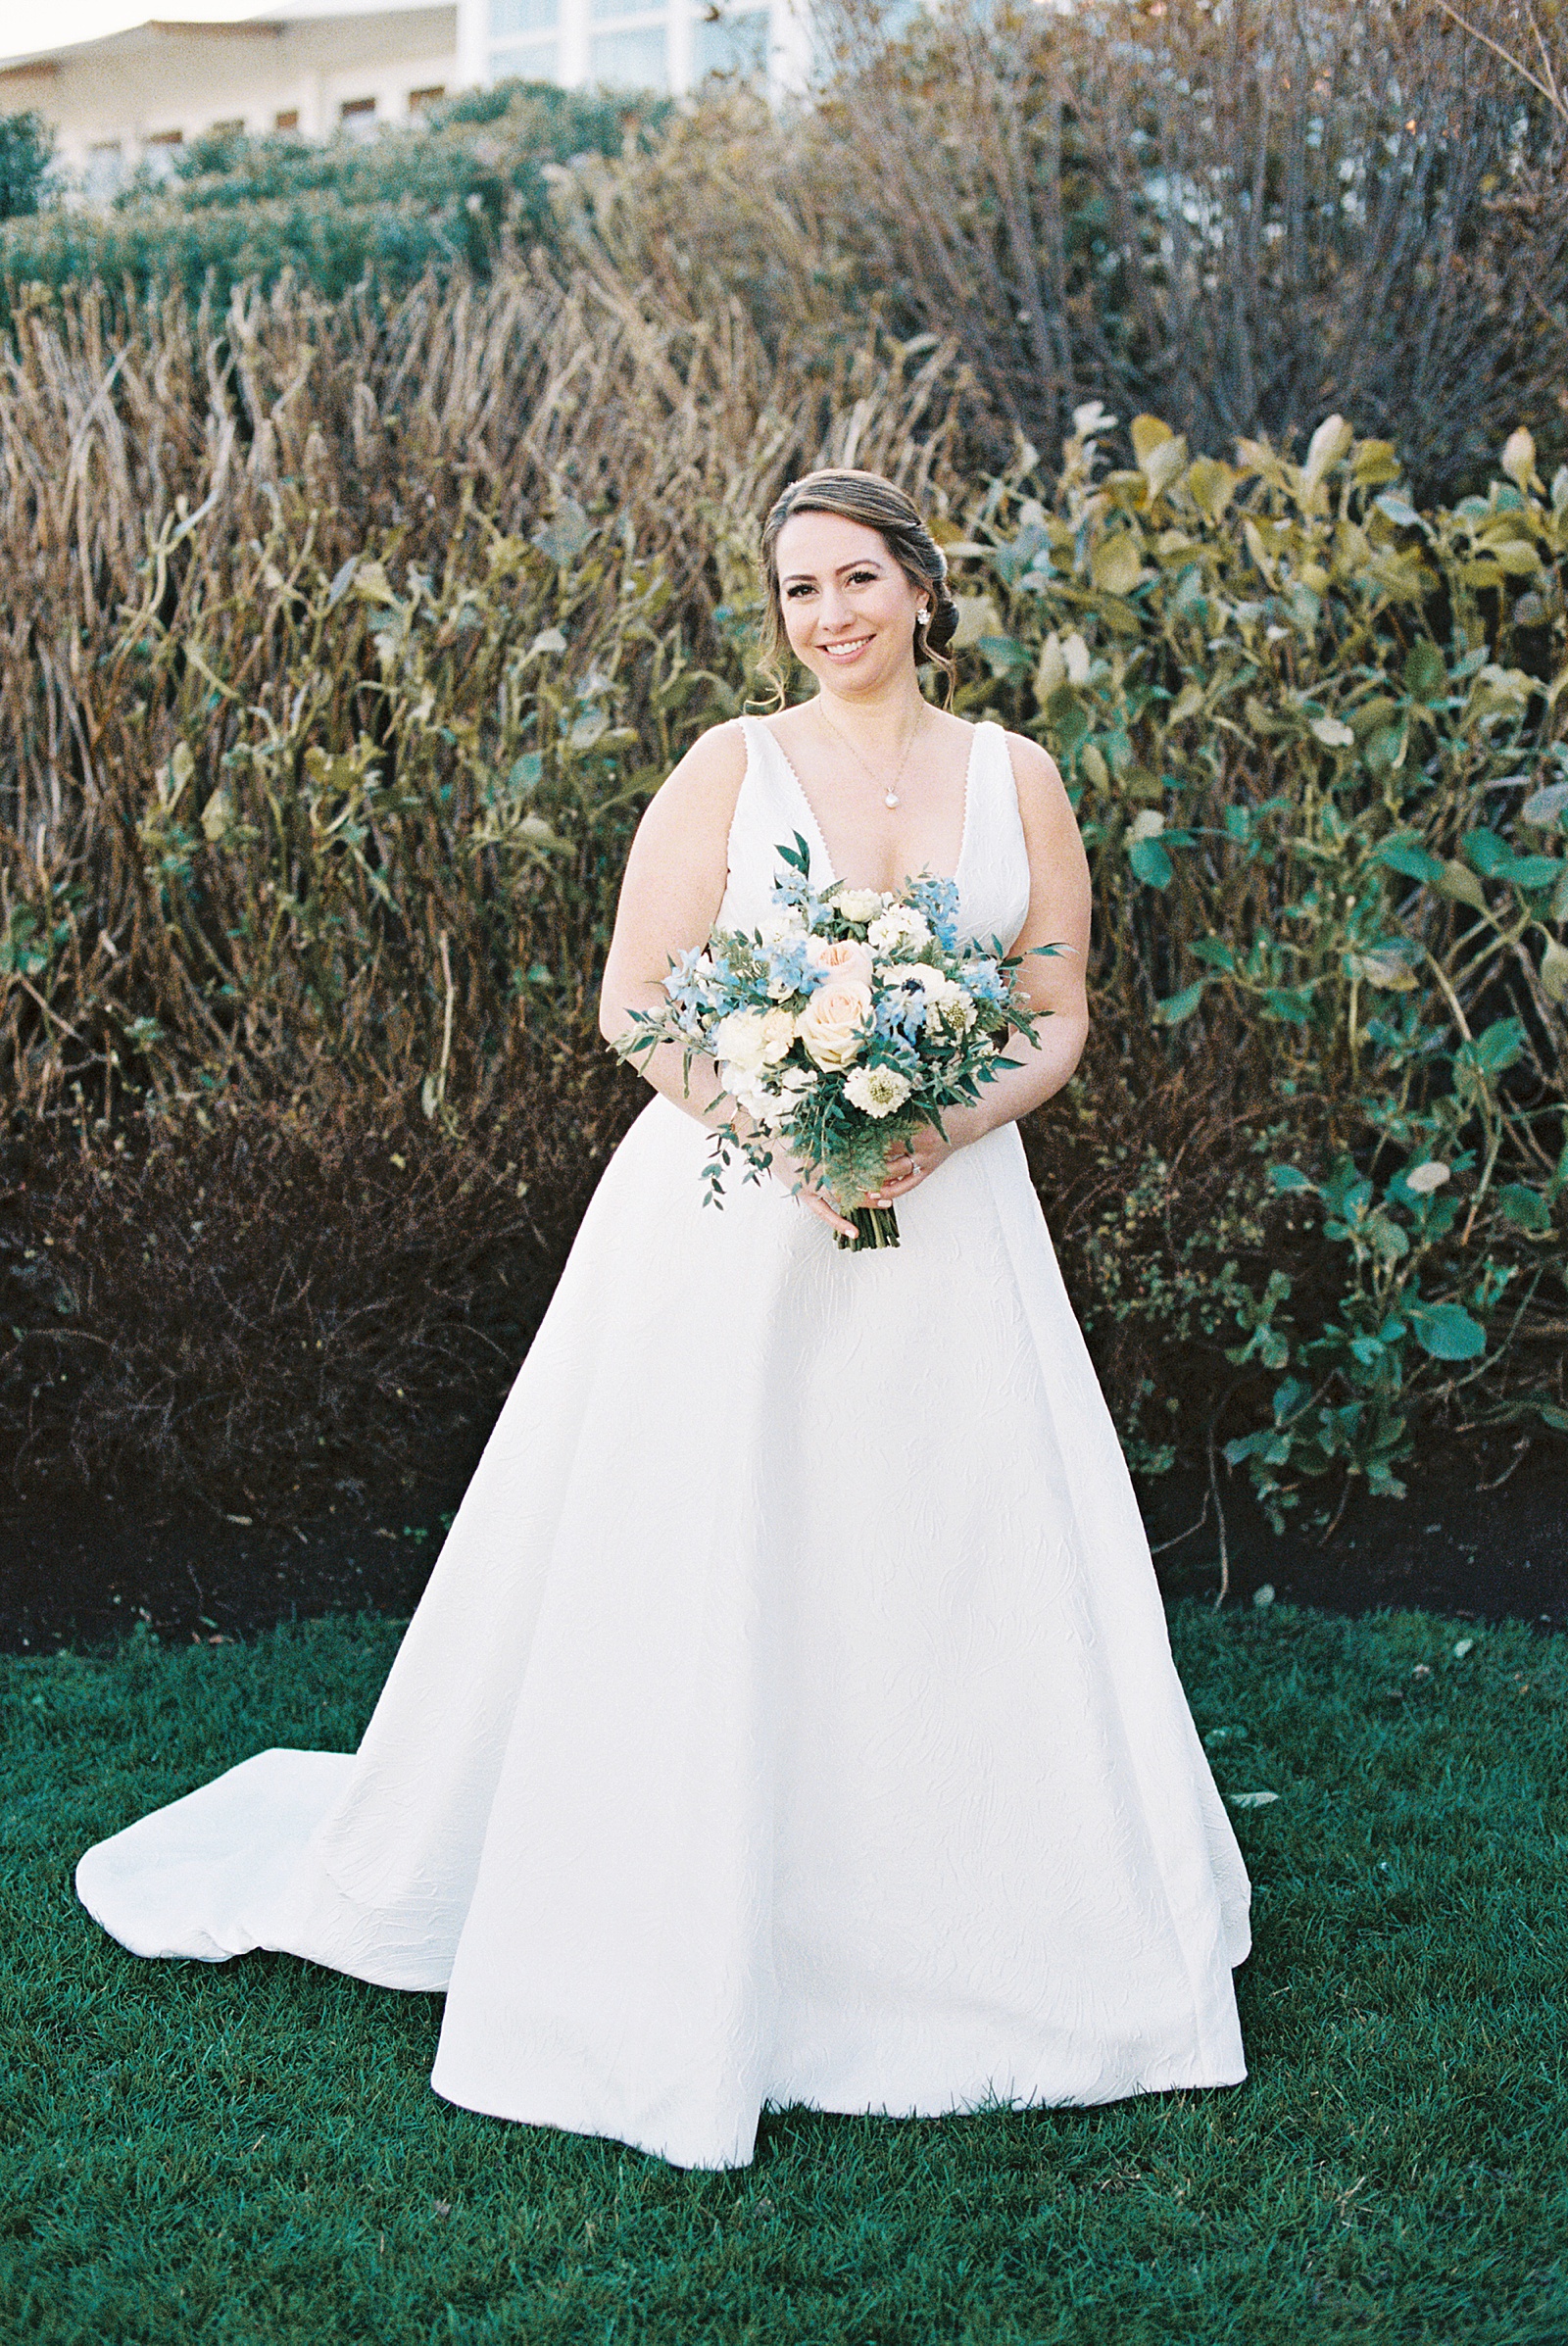 Bride holding large bouquet of cream and blue flowers 